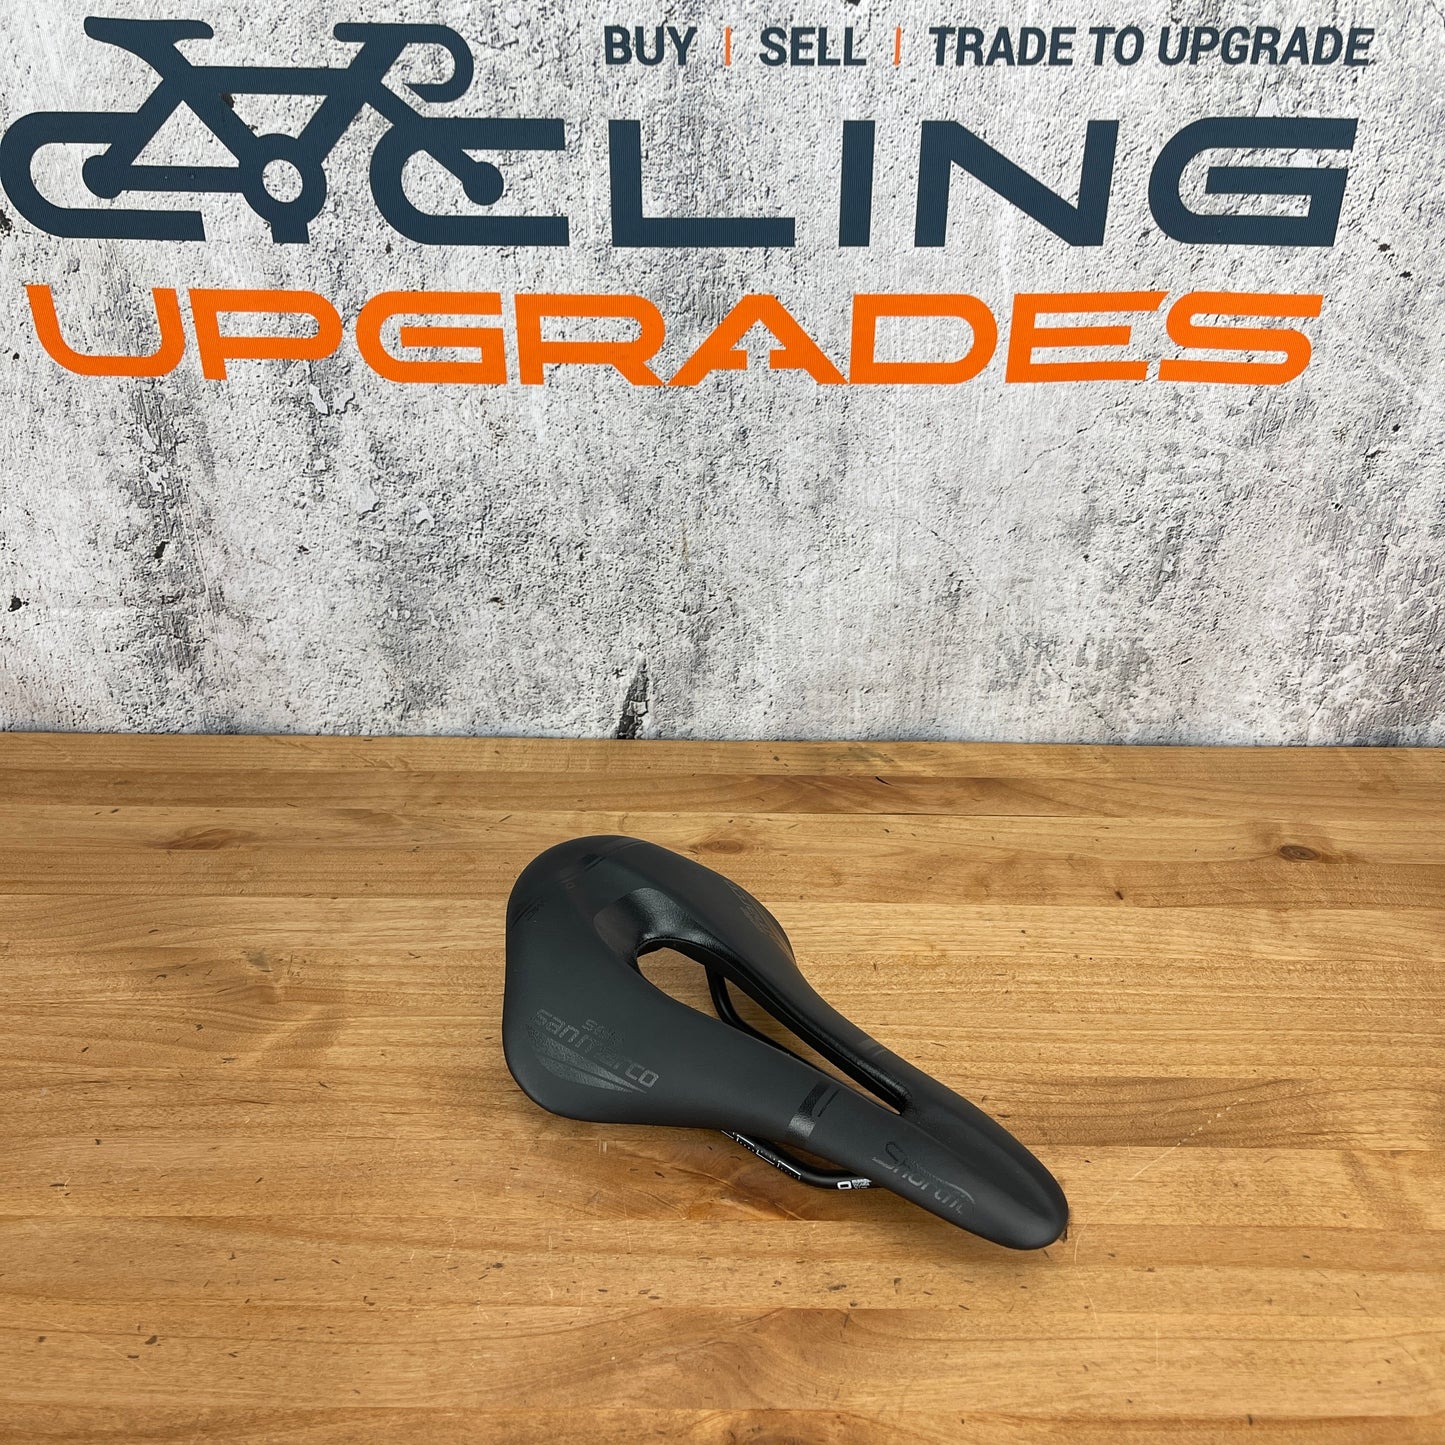 New Take-off! Selle San Marco Short Fit Open-Fit Racing Wide 145mm Saddle 186g